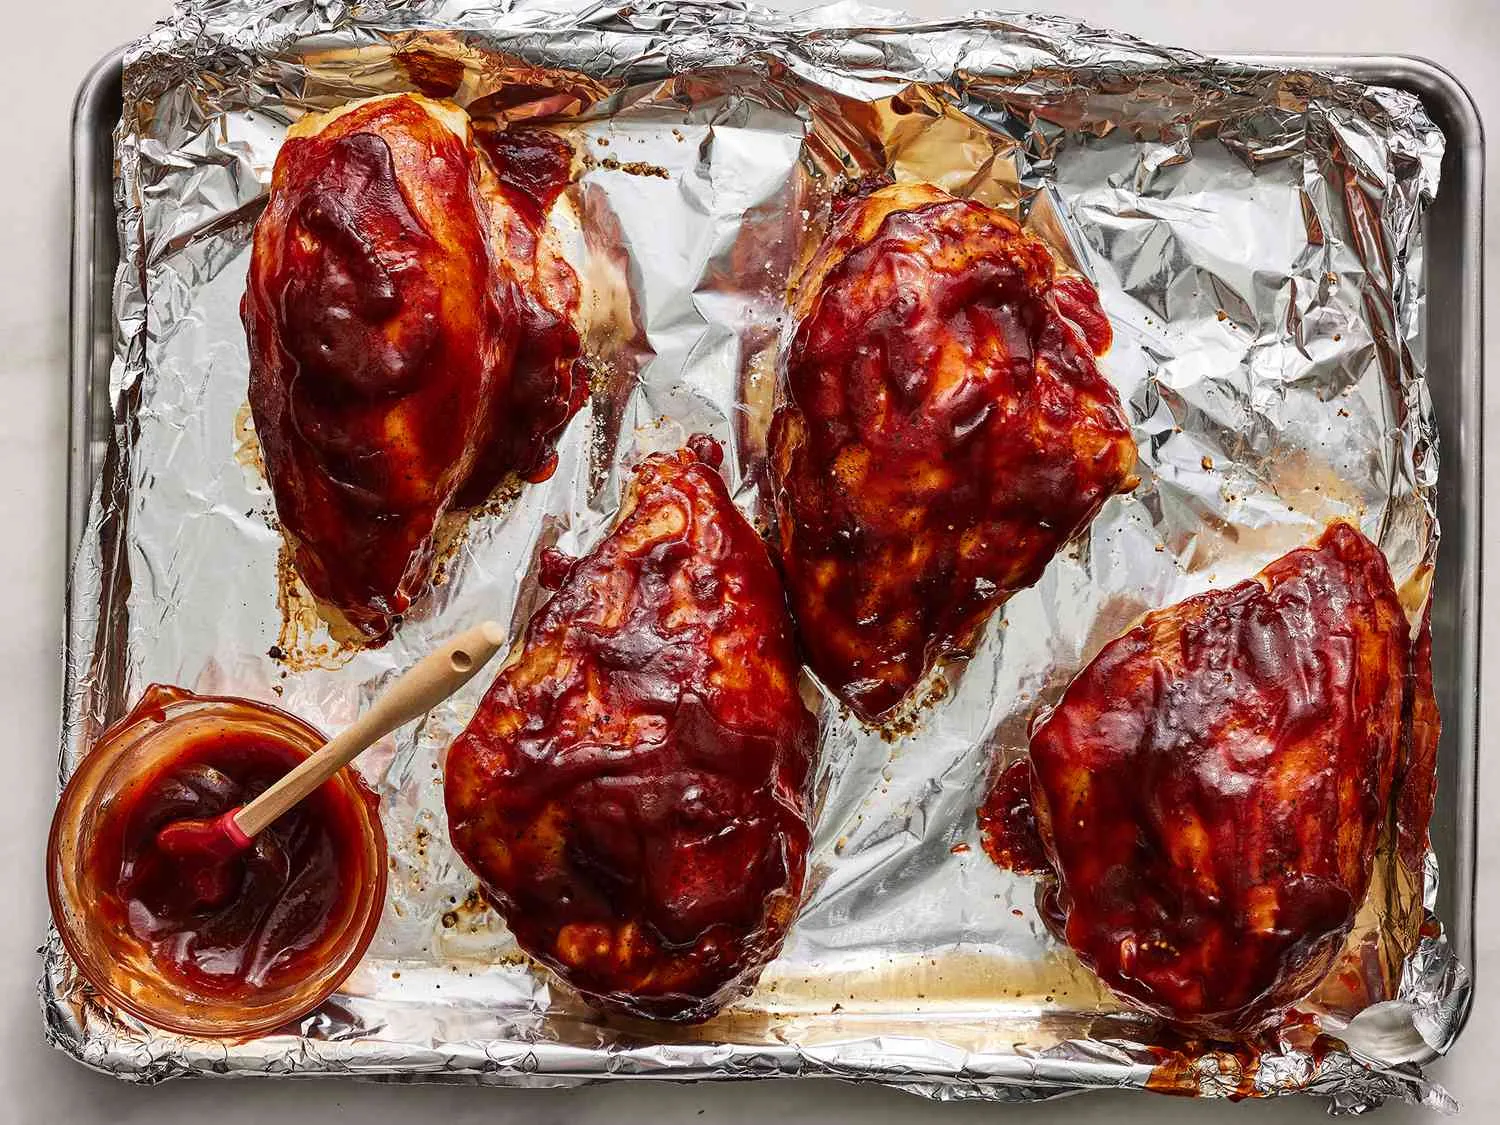 Serving tasty boneless chicken breast with barbecue sauce, oven-baked to perfection.
